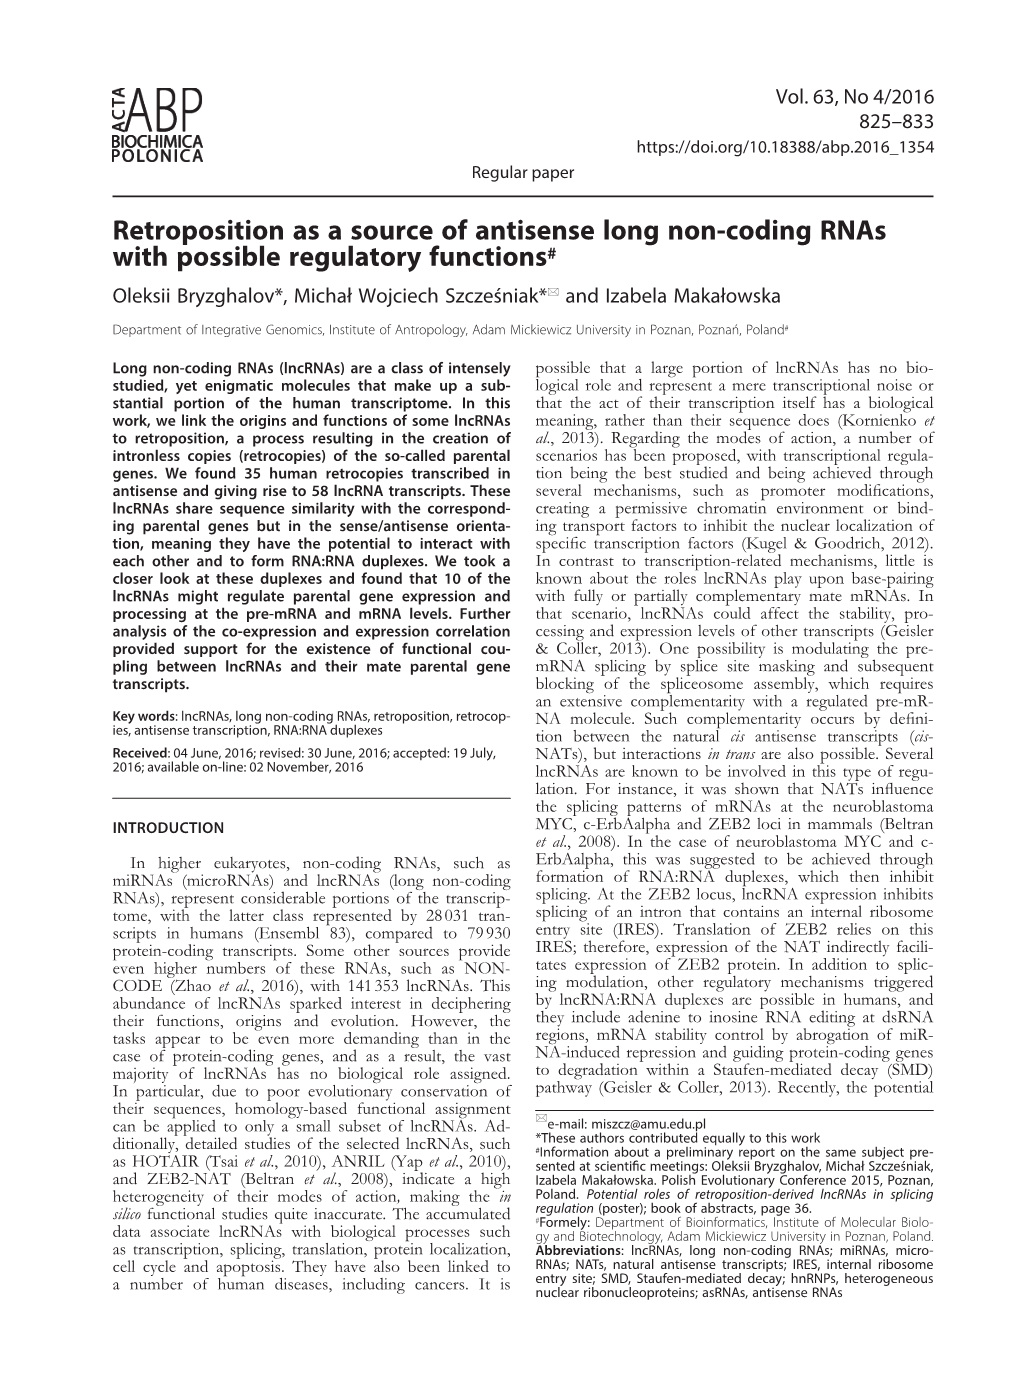 Retroposition As a Source of Antisense Long Non-Coding Rnas with Possible Regulatory Functions